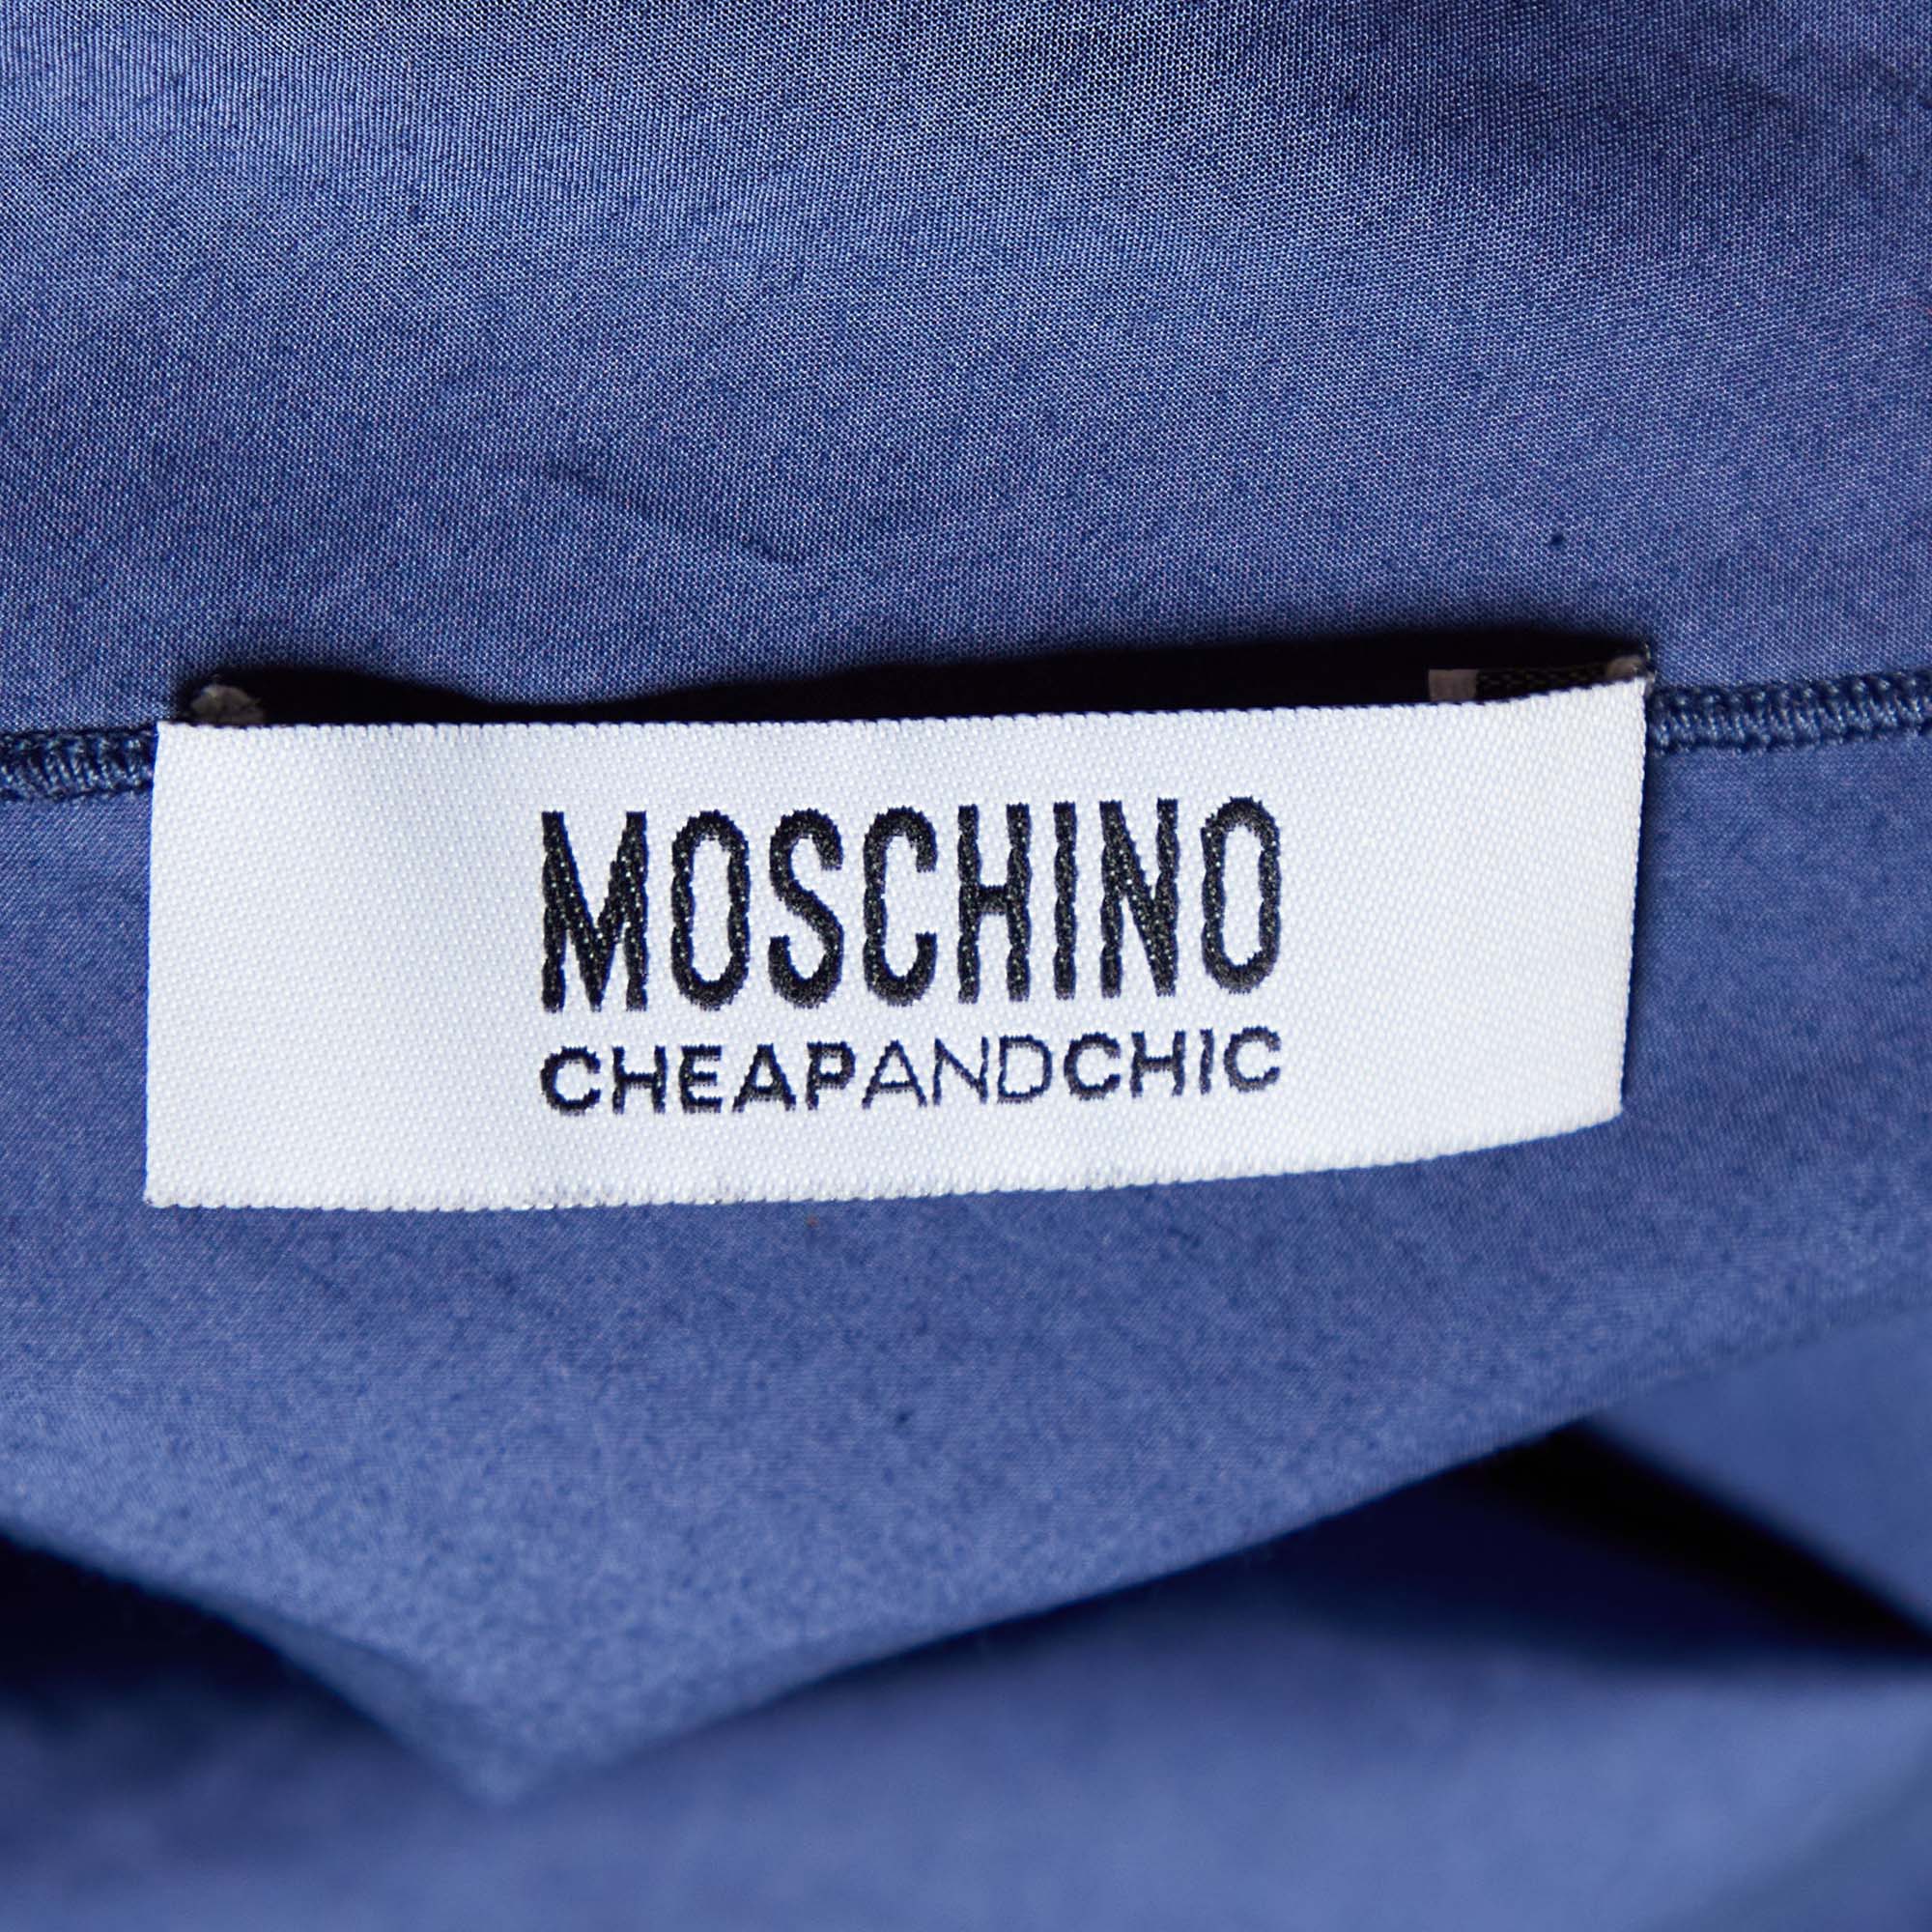 Moschino Cheap And Chic Navy Blue Cotton Ruffle Sleeve Detail Top S